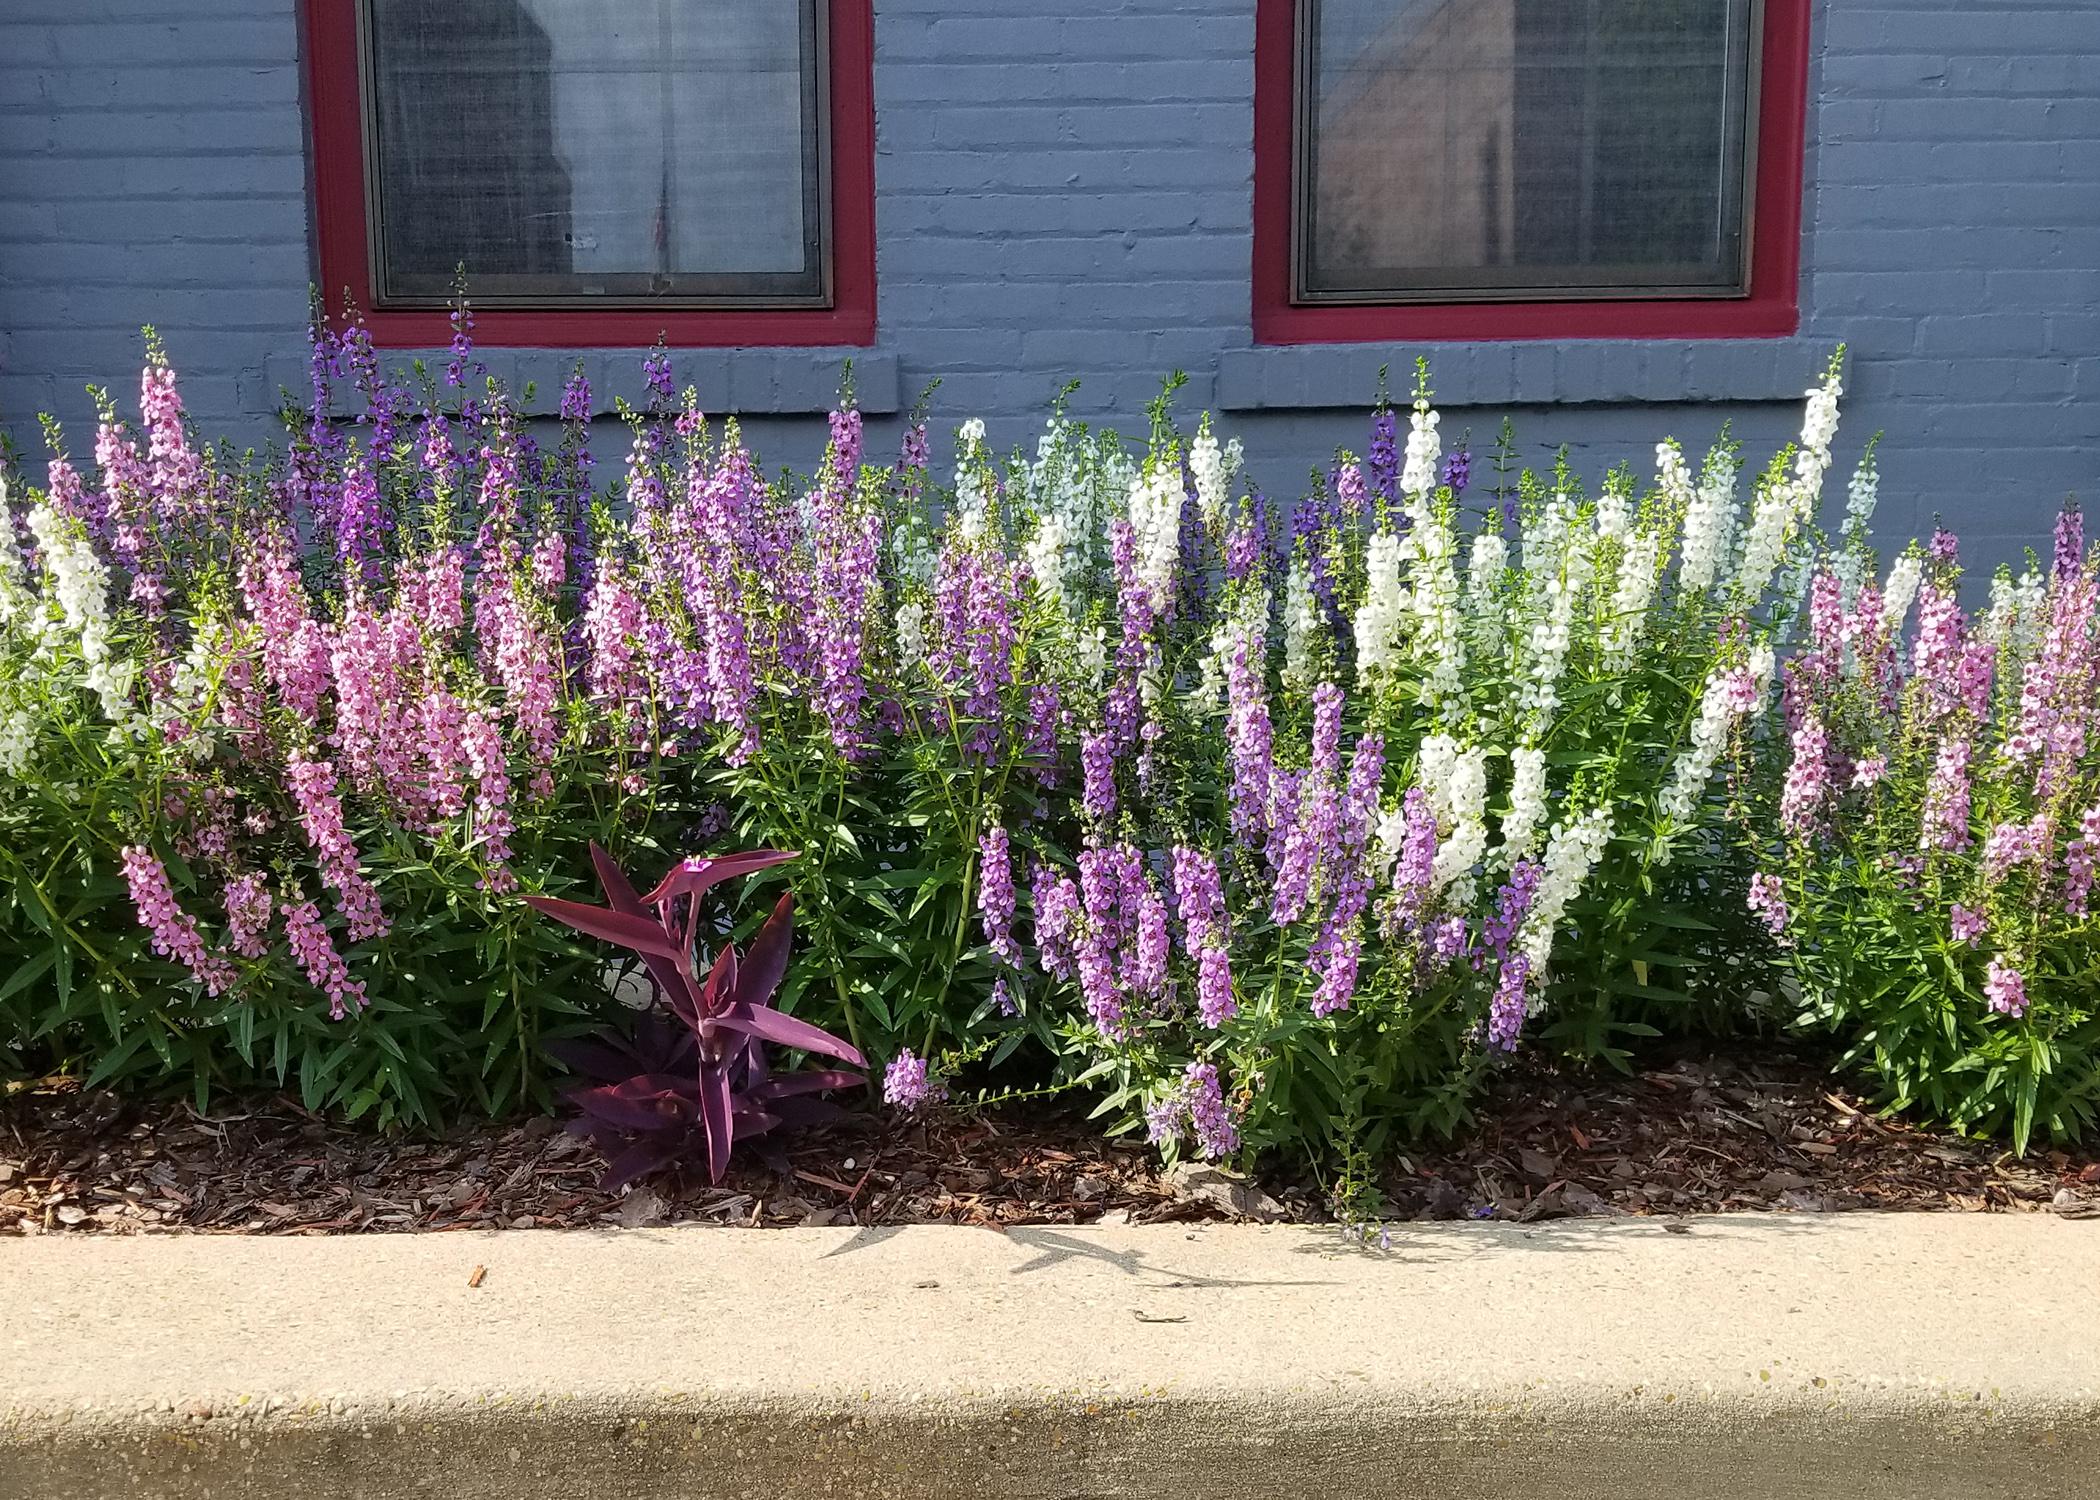 Dozens of white and purple flower stalks rise from a stand of green plants in a cement planter.